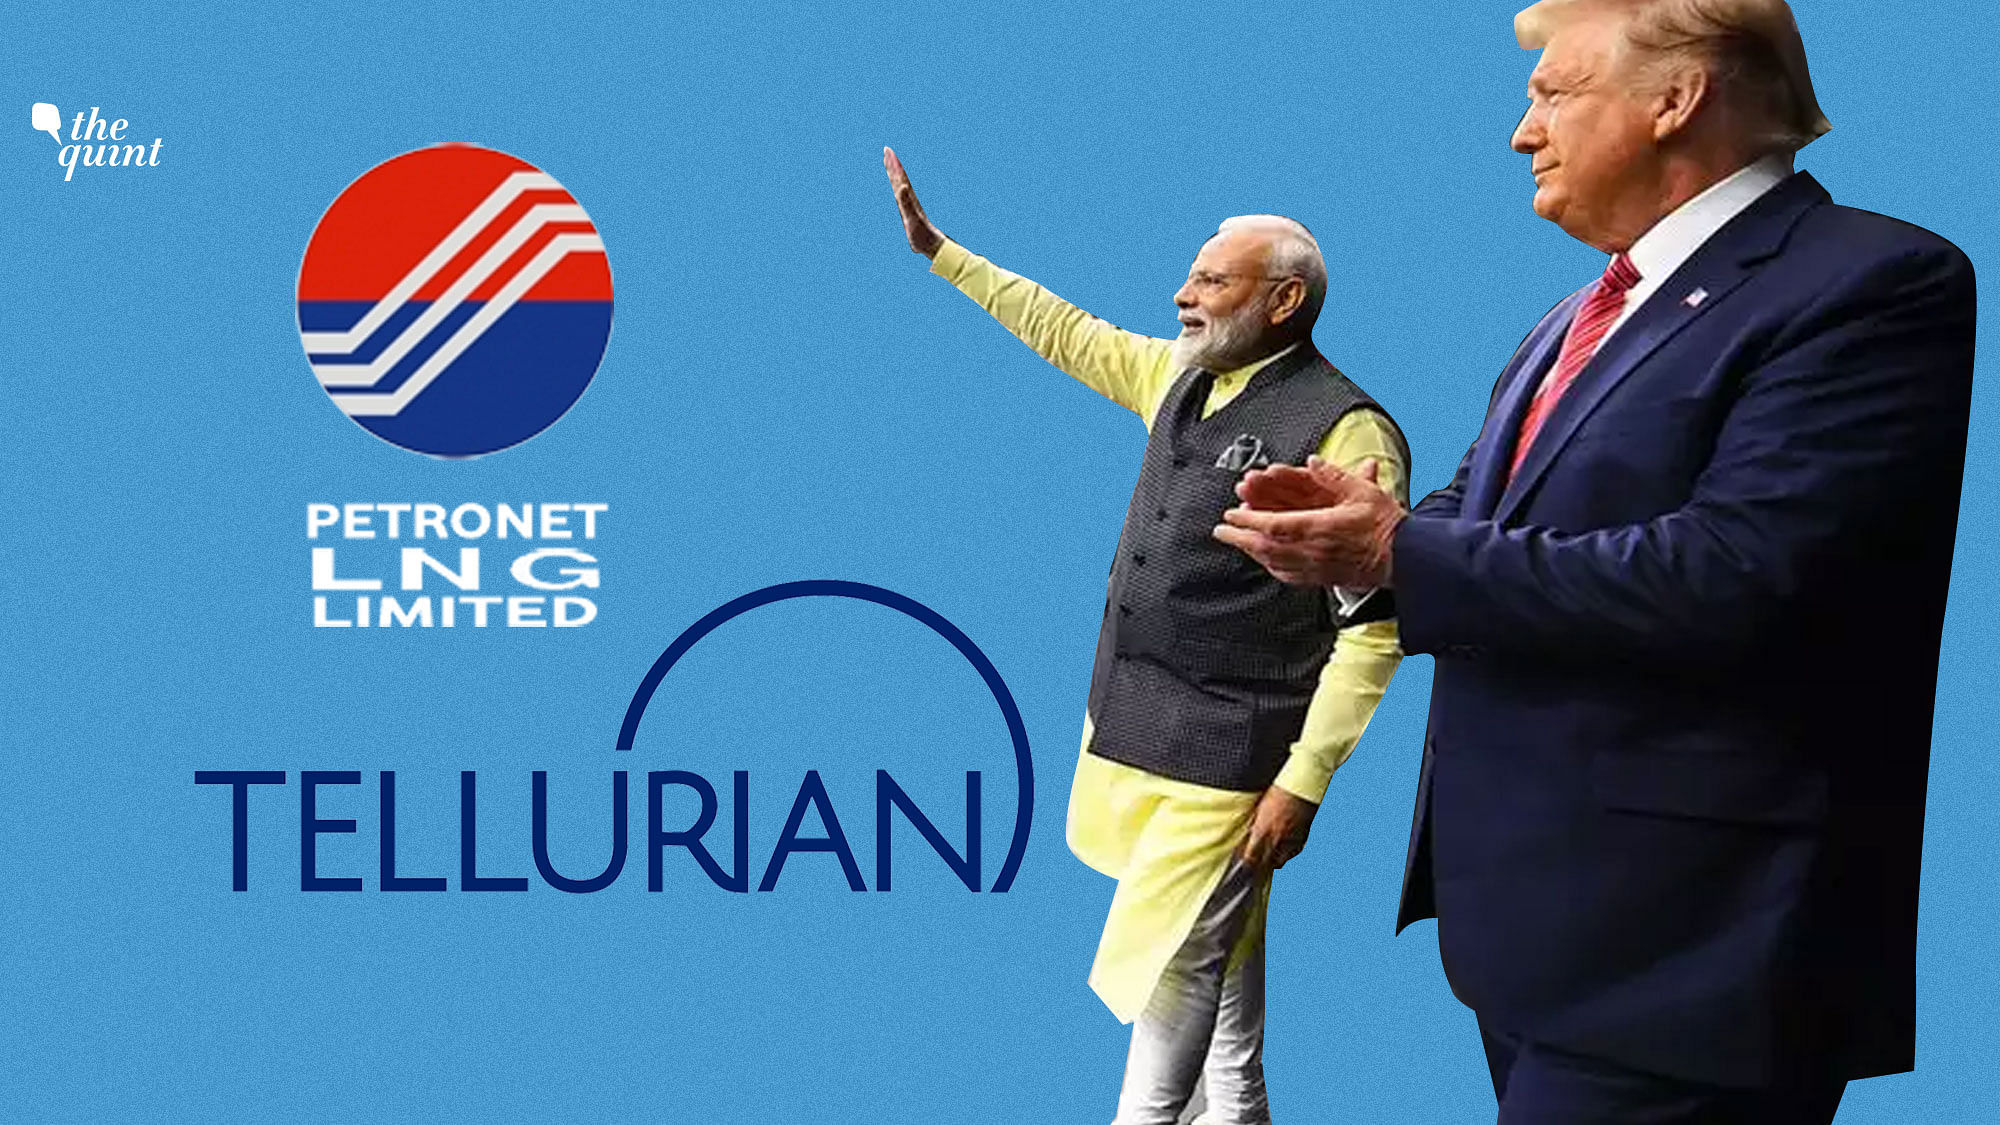 The deal between Petronet and Tellurian was signed in PM Narendra Modi’s presence in Houston.